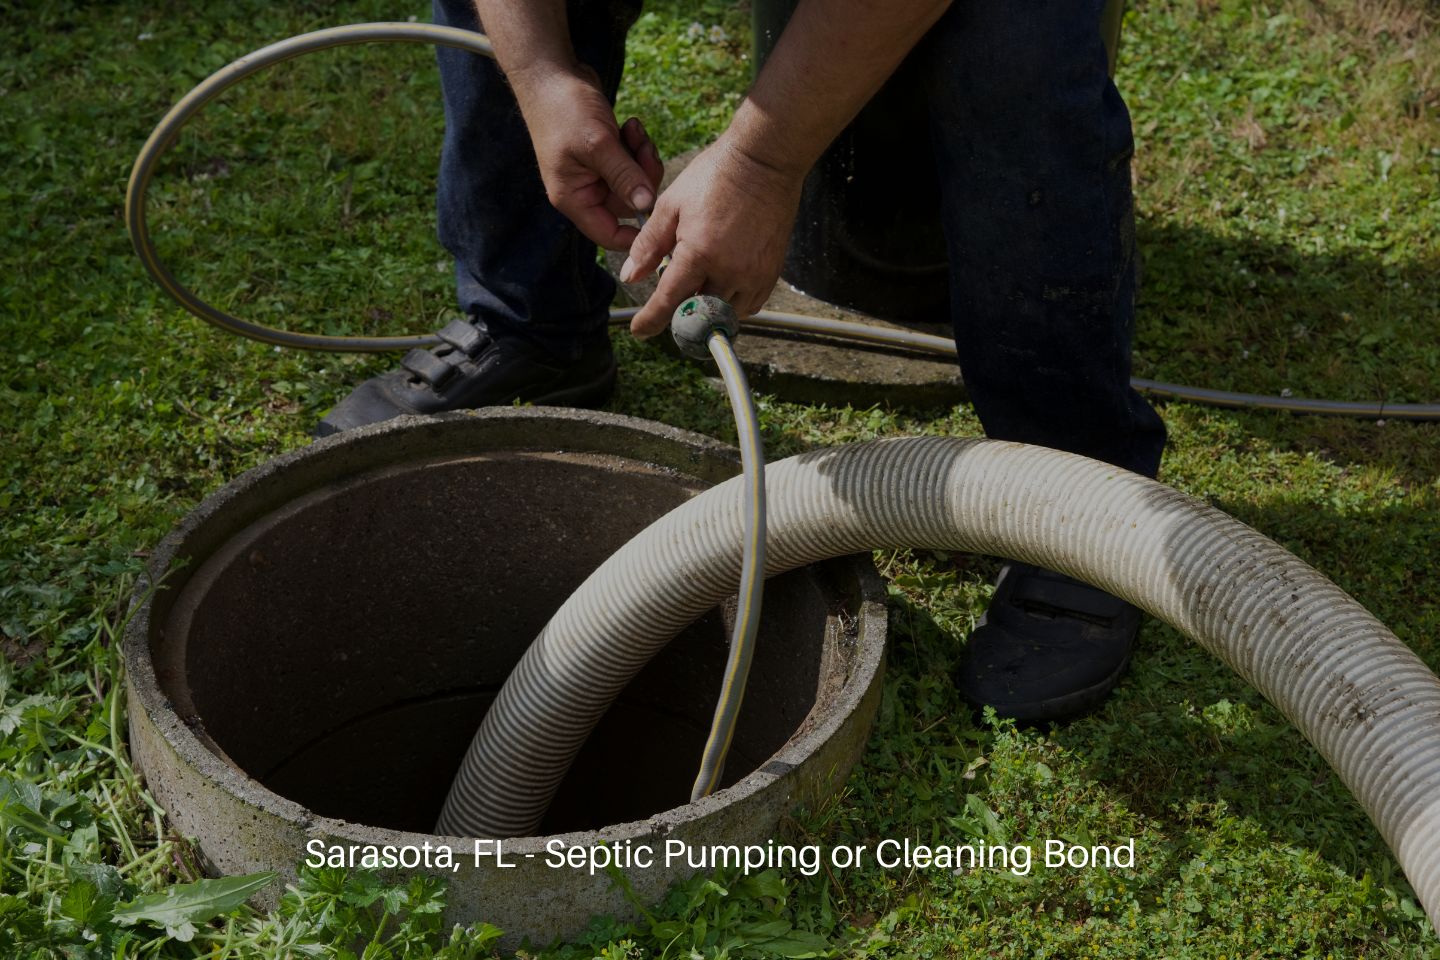 Sarasota, FL - Septic Pumping or Cleaning Bond - The removal of sewage sludge and cleaning of a domestic septic tank.